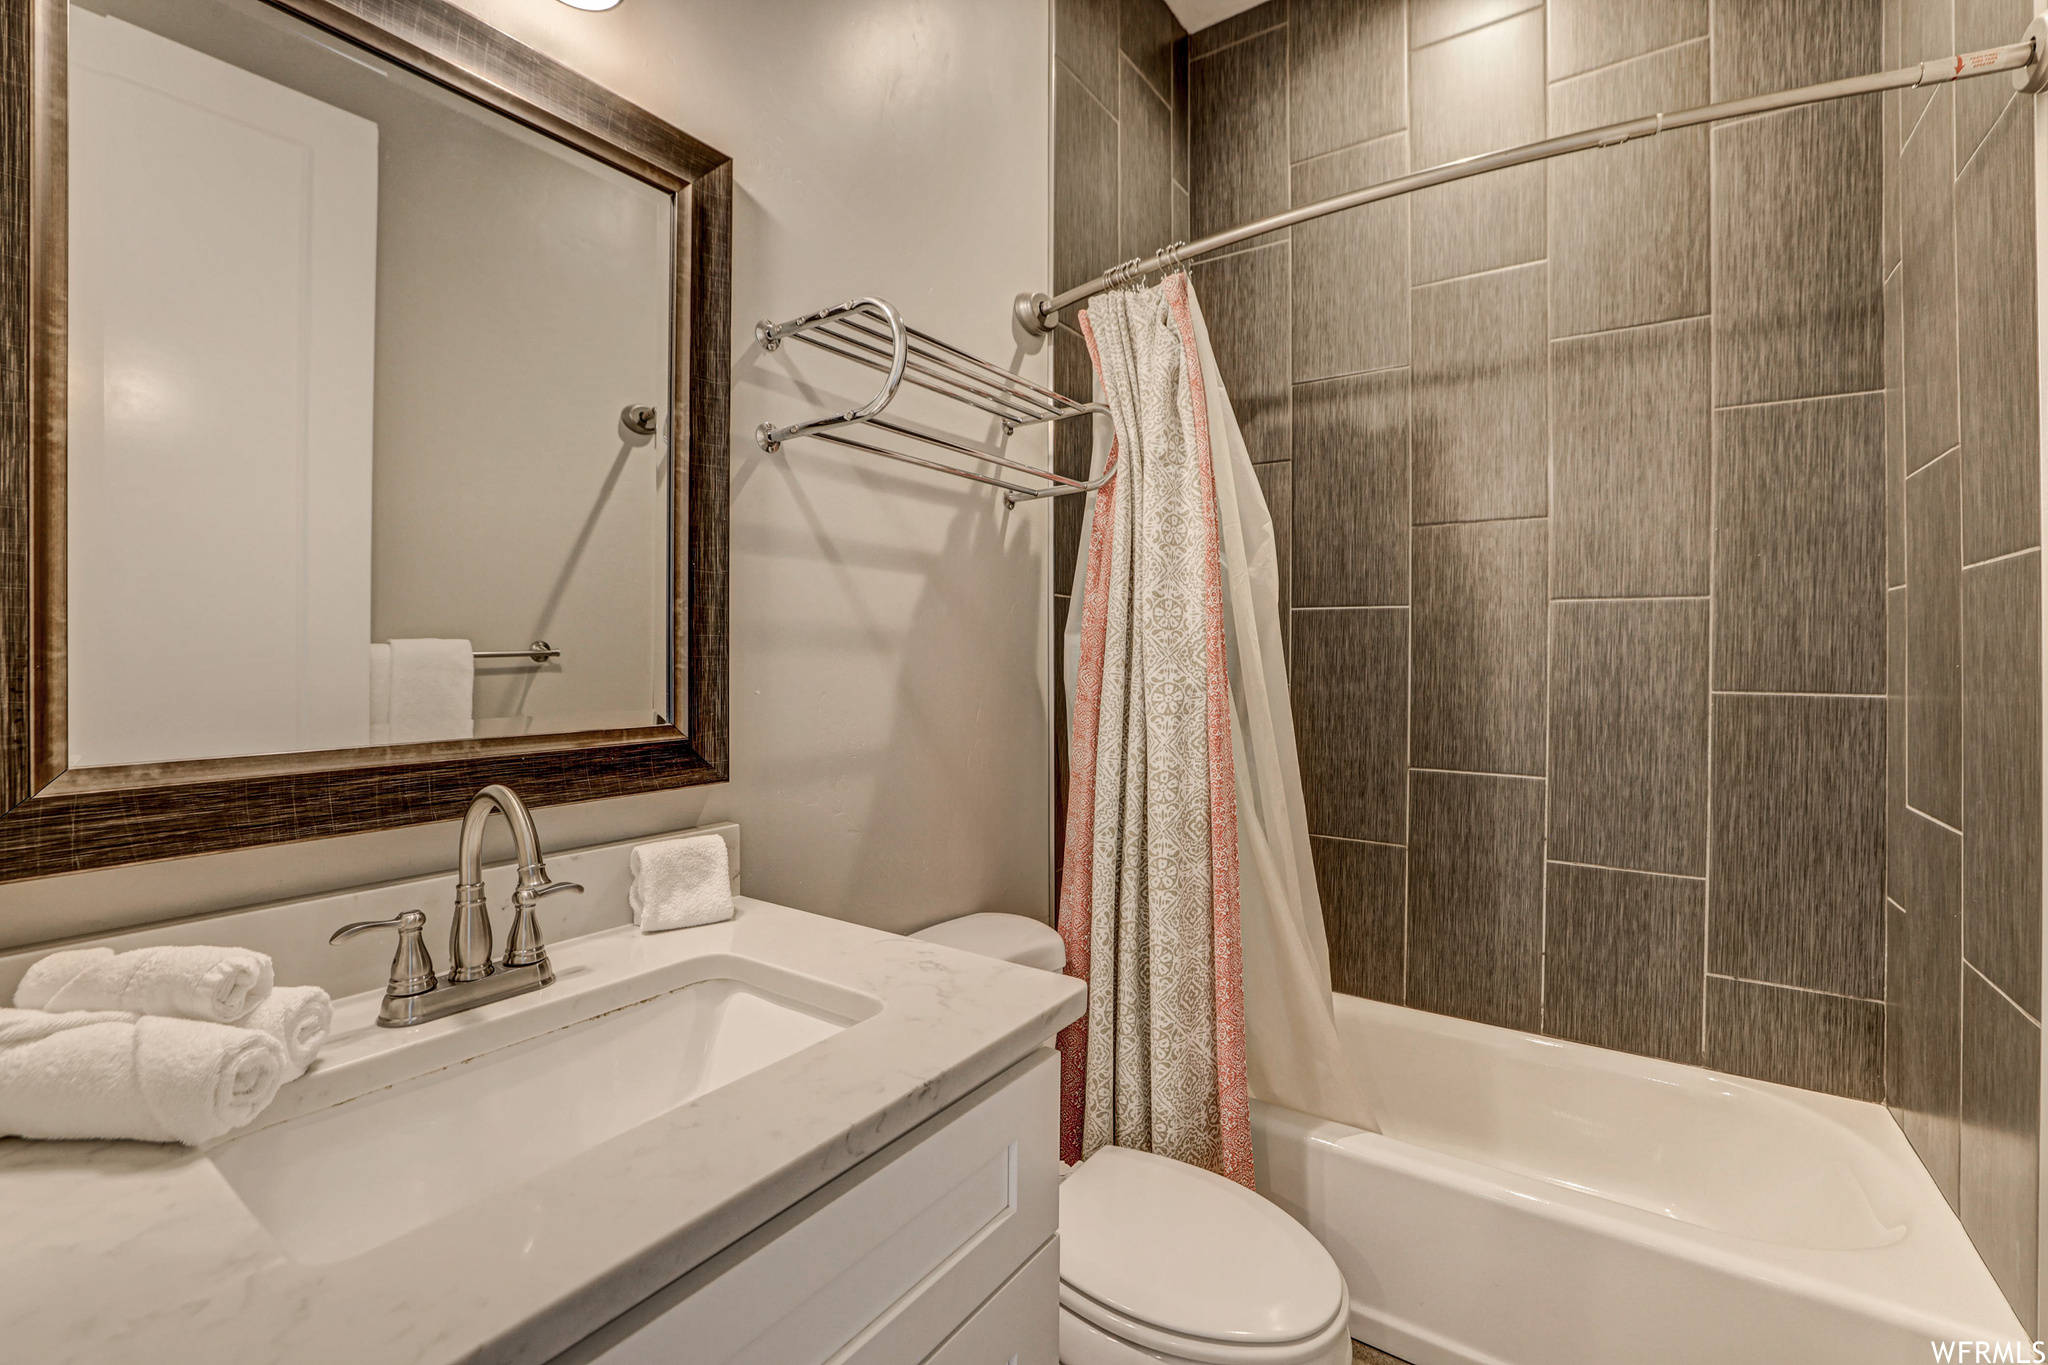 Full bathroom with mirror, shower curtain, toilet, bathtub / shower combination, and vanity